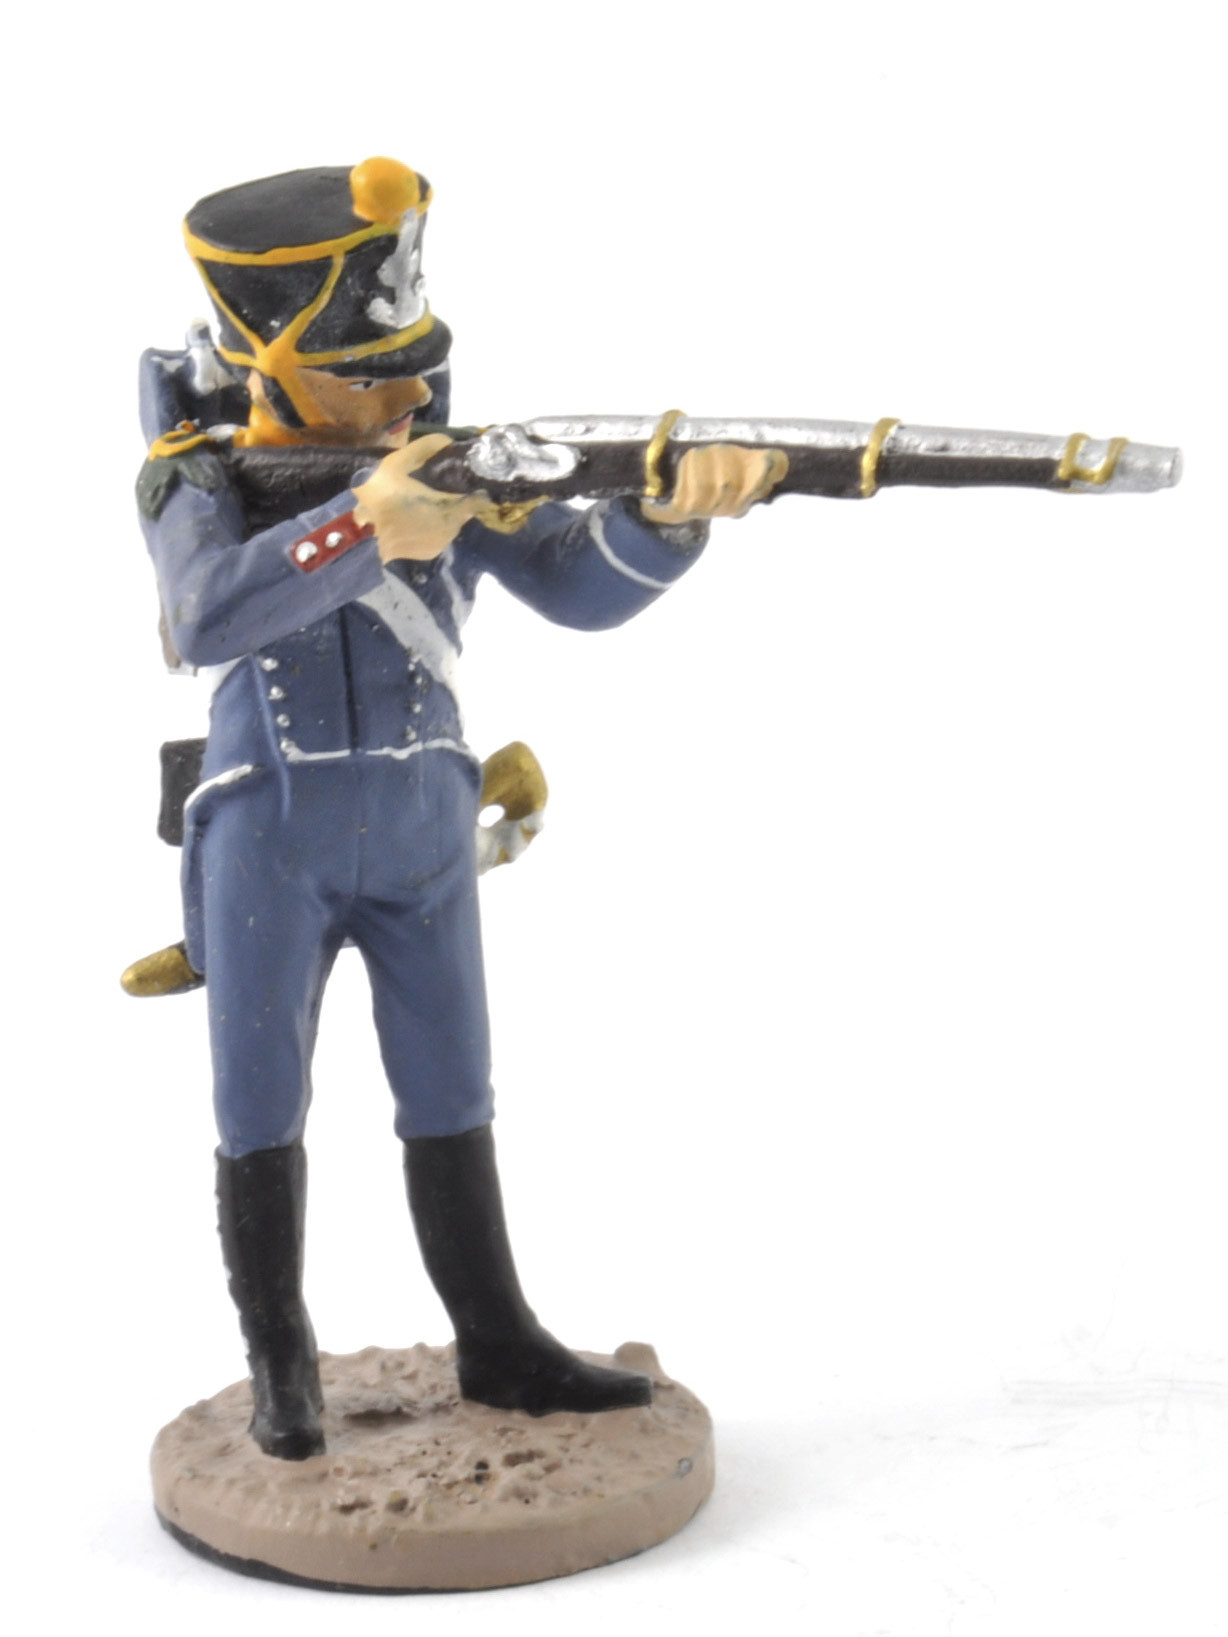 Shooter from French Light Infantry Division,1813